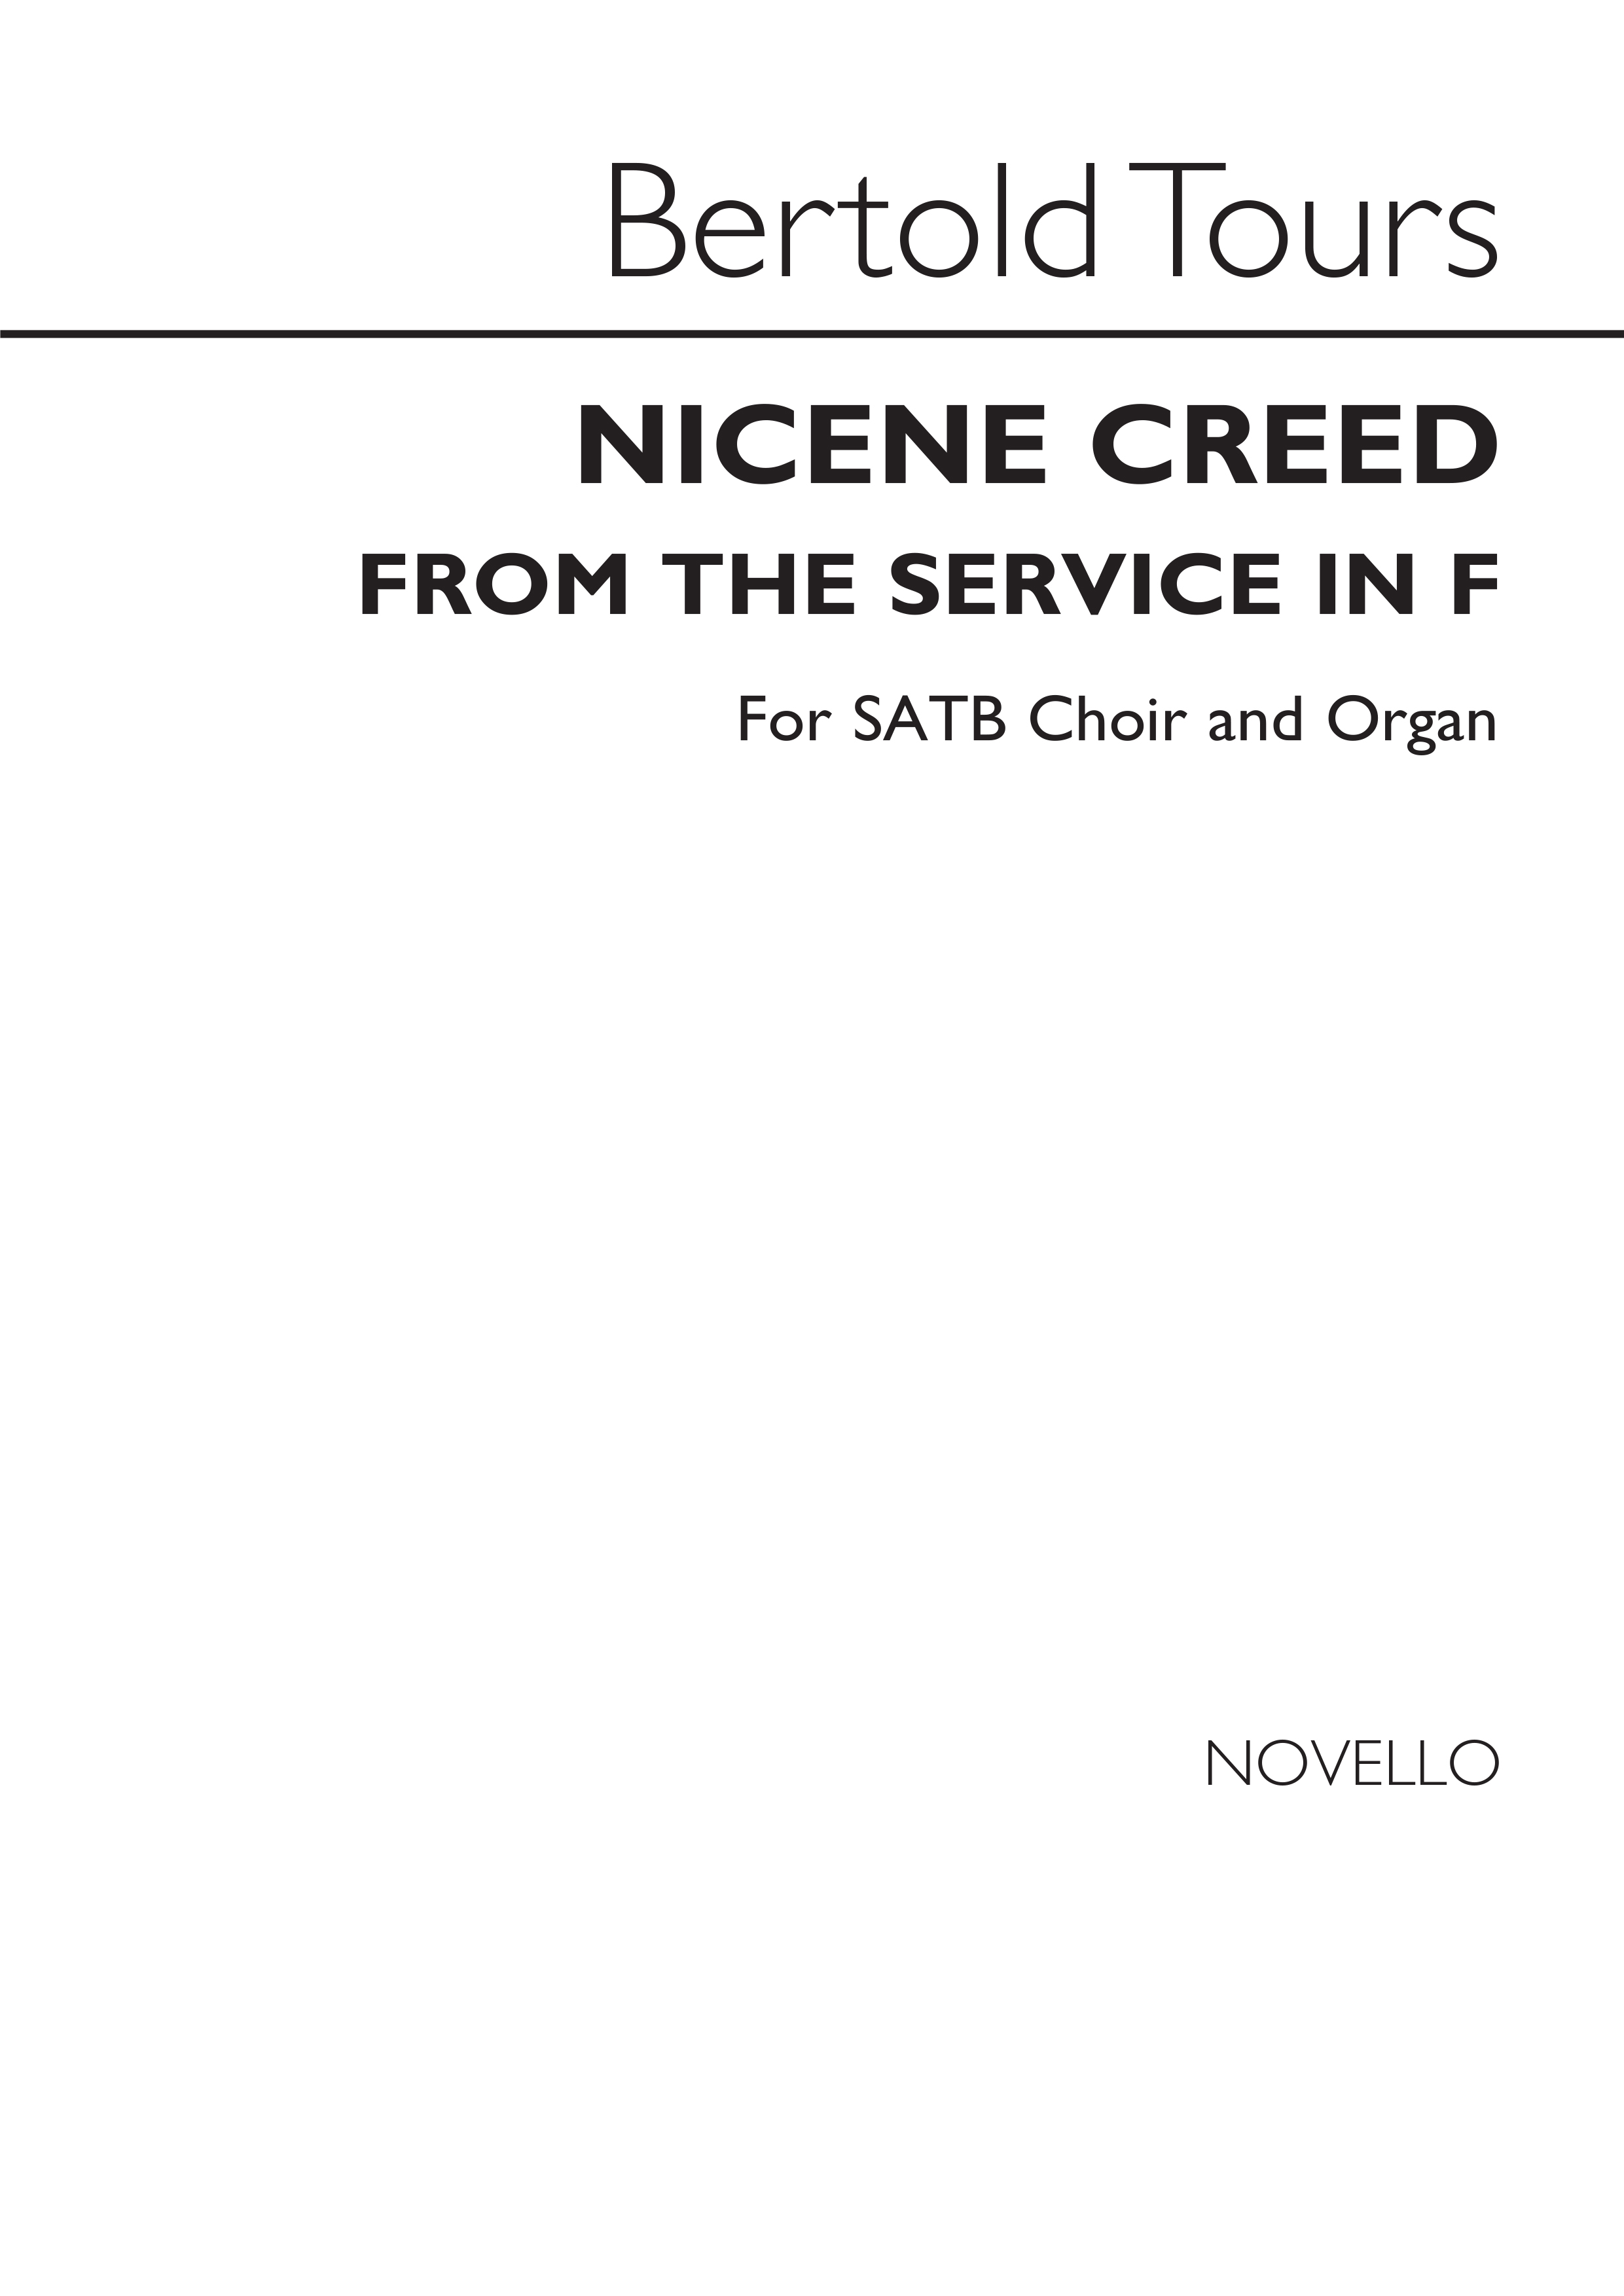 Berthold Tours: The Nicene Creed In F (From Tours Service In F) Satb/Organ